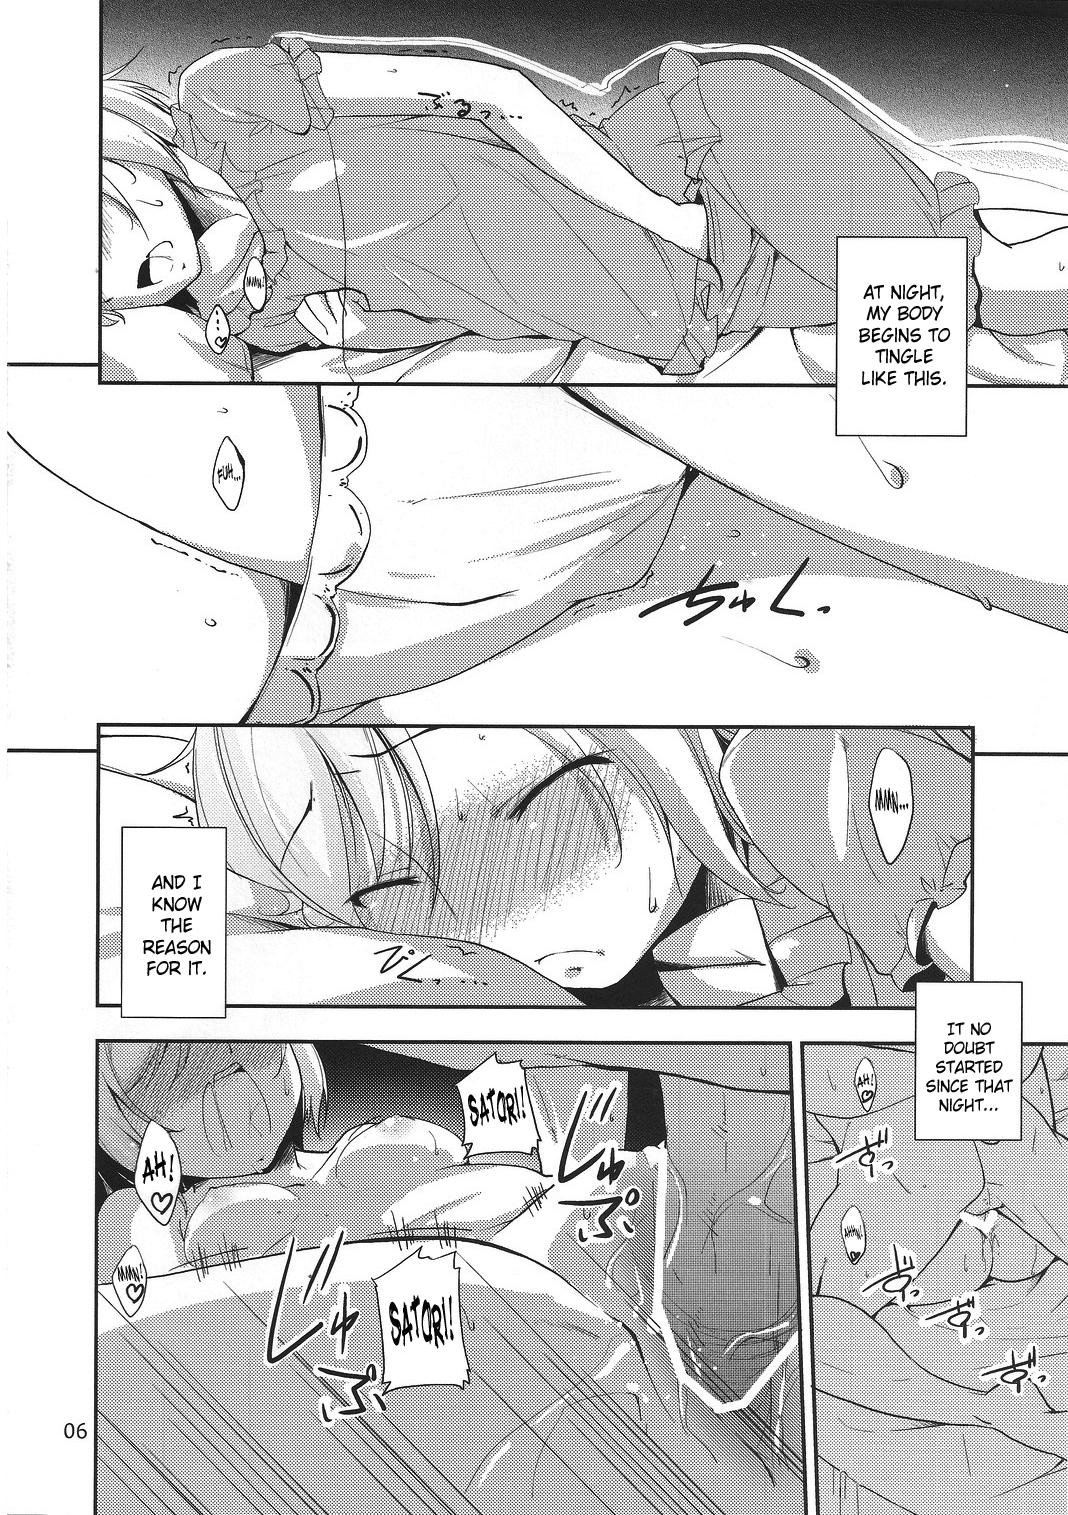 Pay Urakoi 2 - Touhou project Online - Page 5